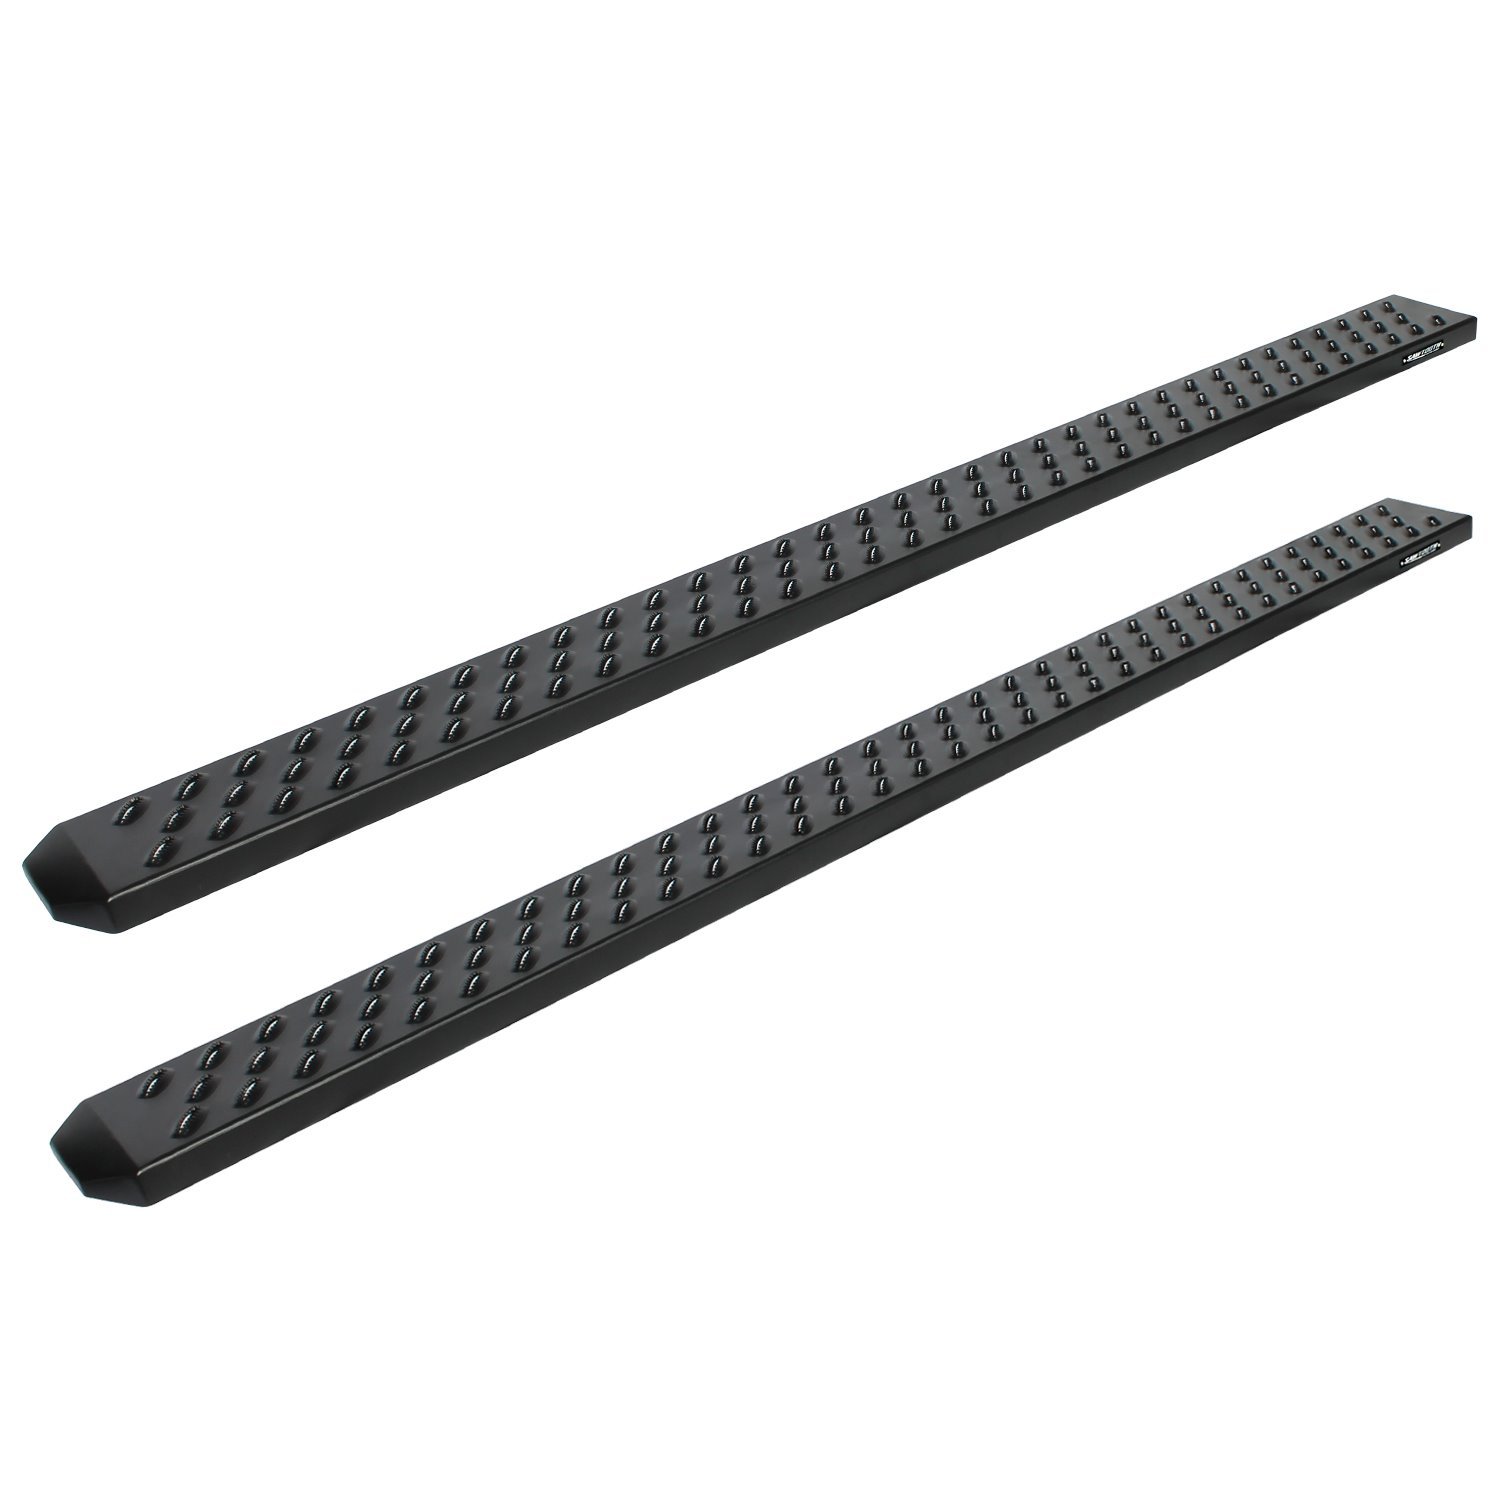 2104-0142BT 6.5 in Sawtooth Slide Track Running Boards, Black Aluminum, Fits Select Toyota Tundra CrewMax Cab